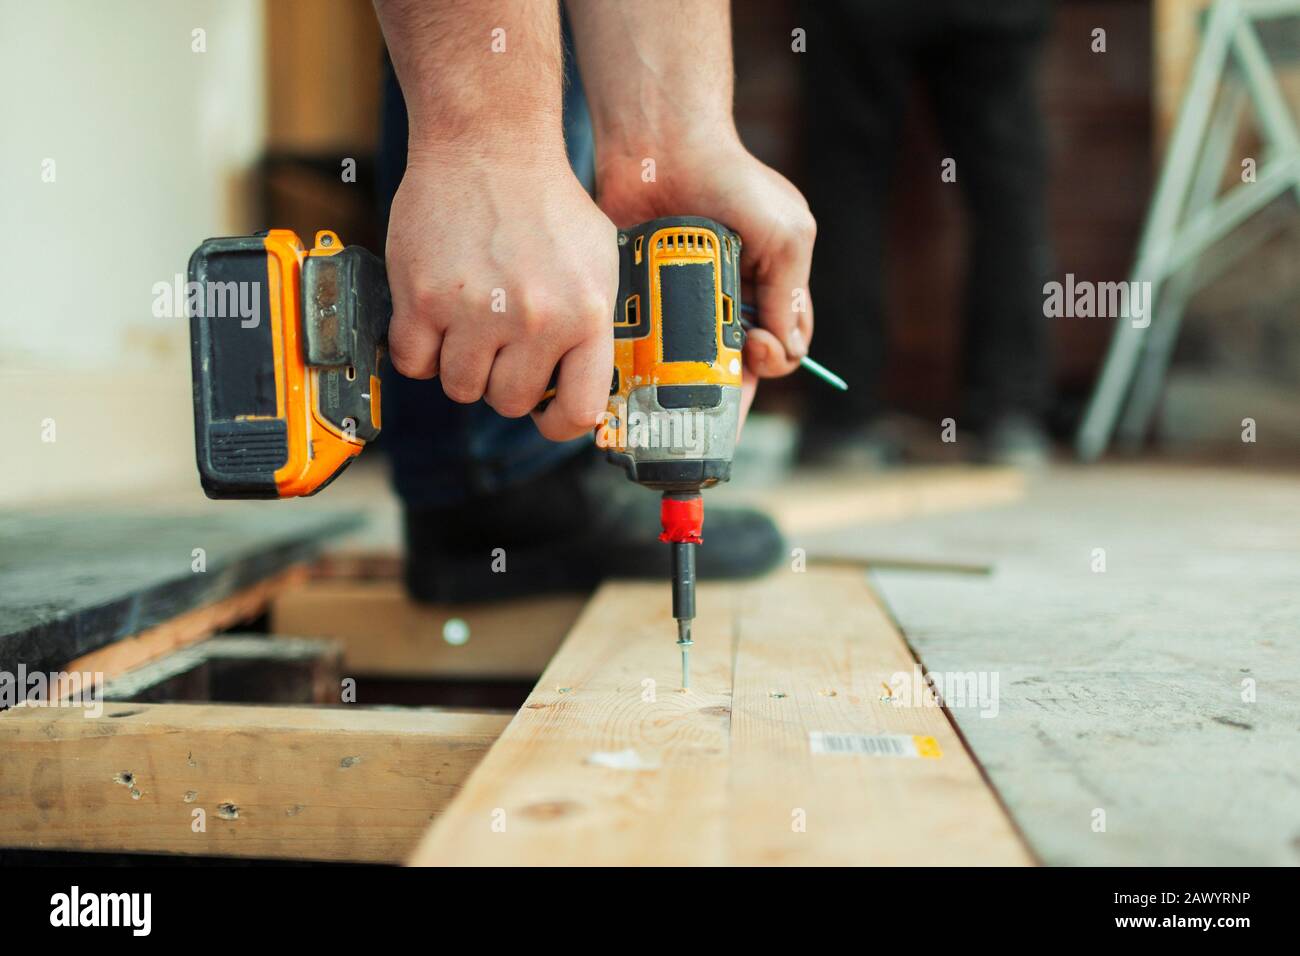 Close up construction worker using power drill installing floorboard Stock Photo